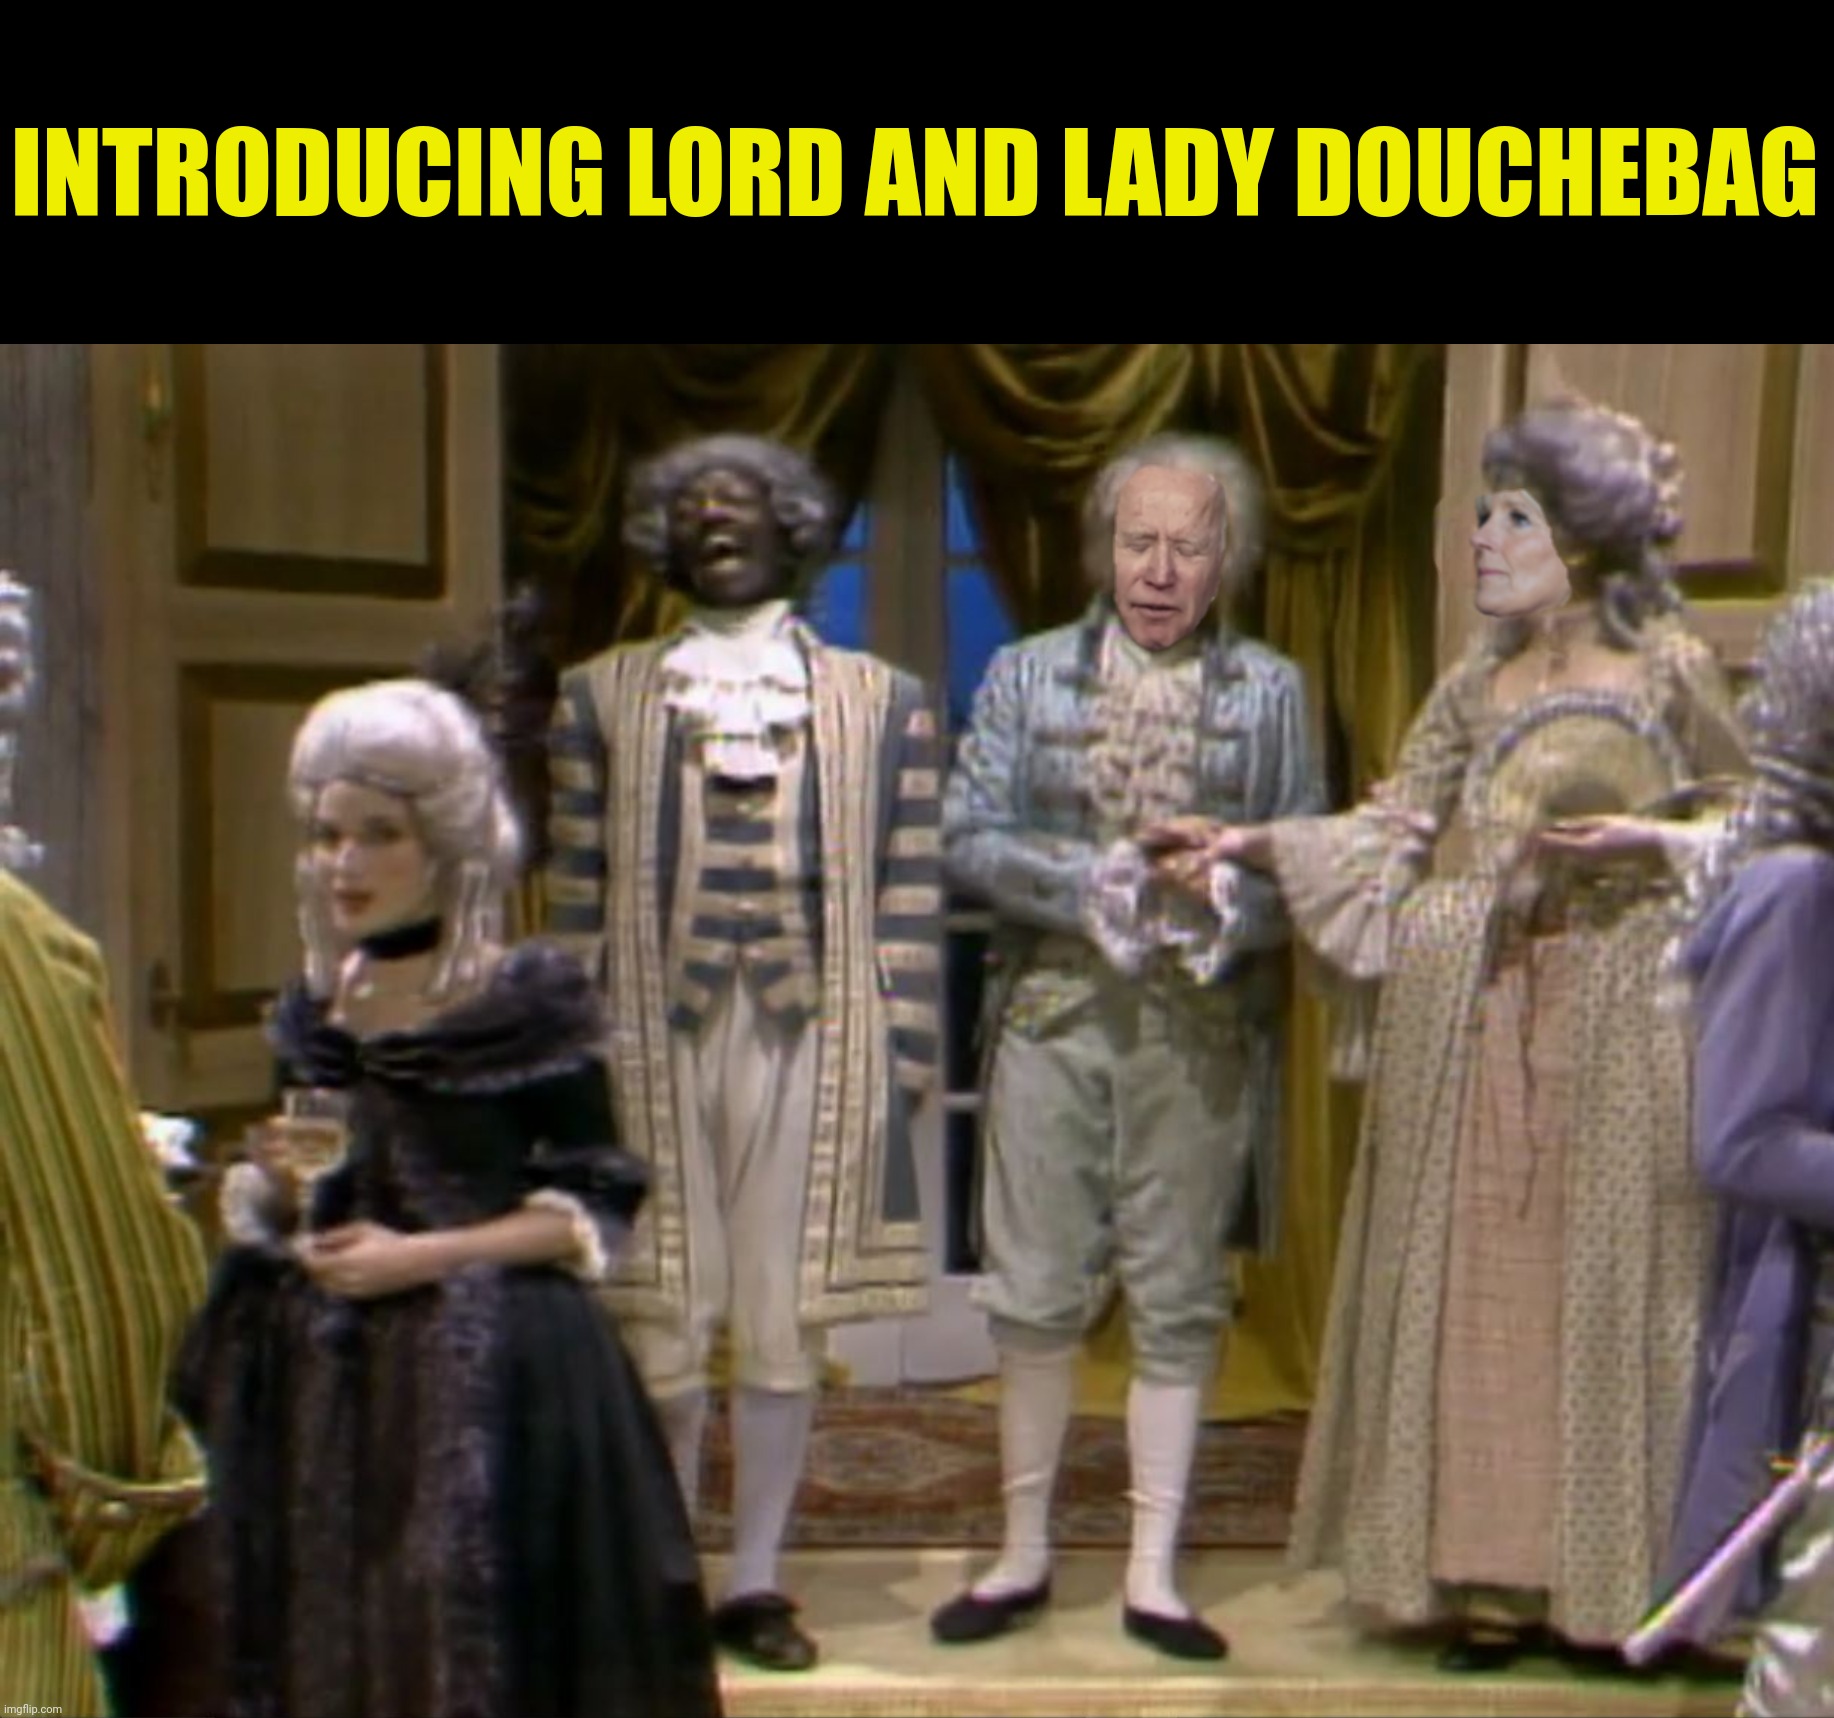 INTRODUCING LORD AND LADY DOUCHEBAG | made w/ Imgflip meme maker